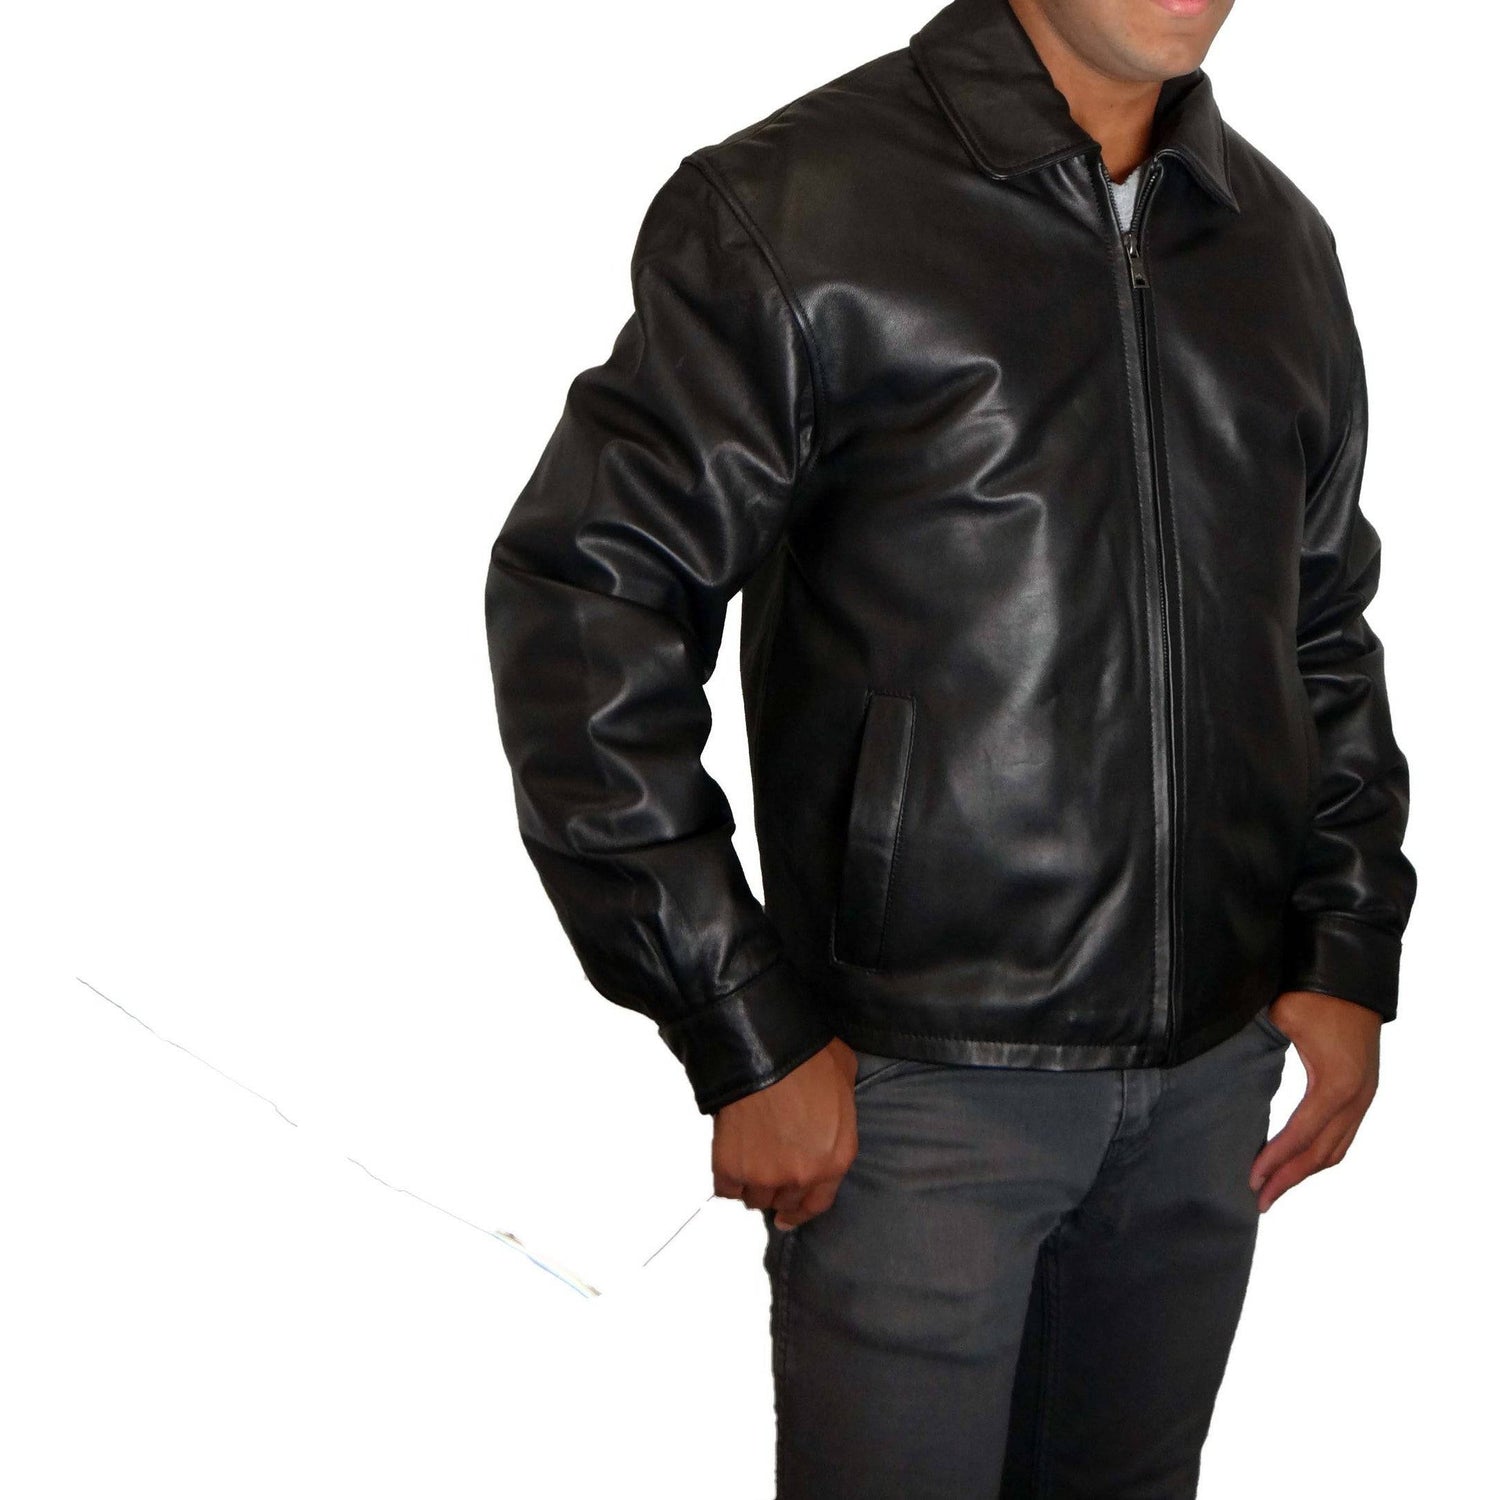 Knoles & Carter Men's Zip Front Leather Jacket - Zooloo Leather